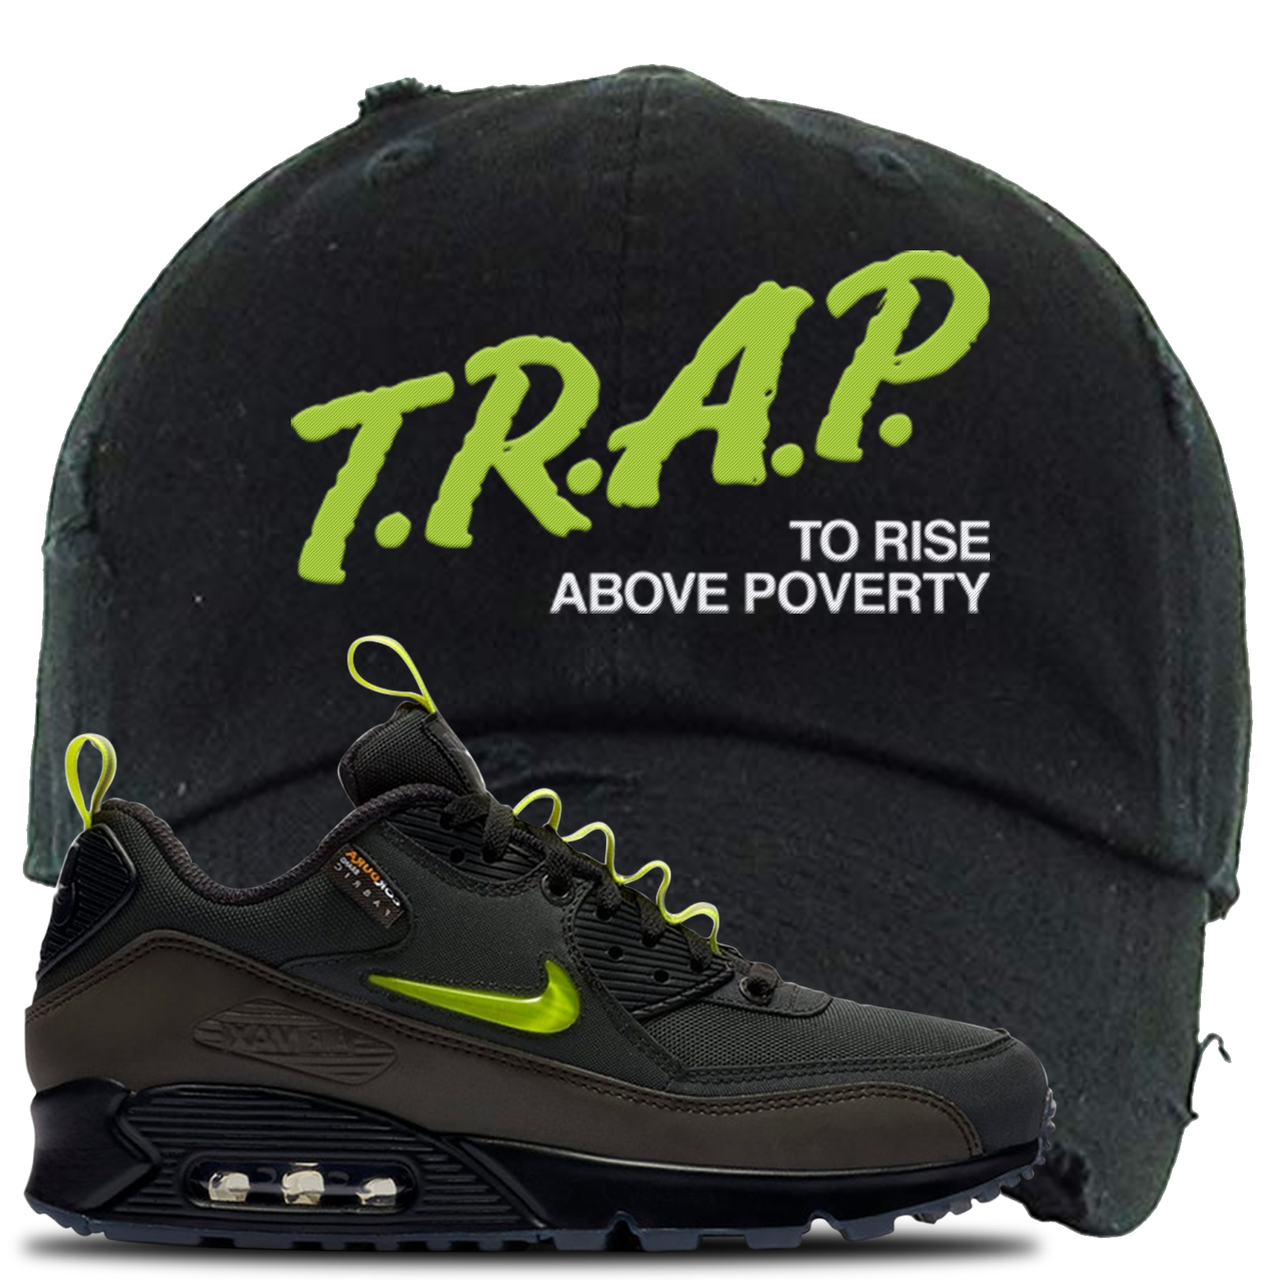 The Basement X Air Max 90 Manchester Trap to Rise Above Poverty Black Sneaker Hook Up Distressed Dad Hat